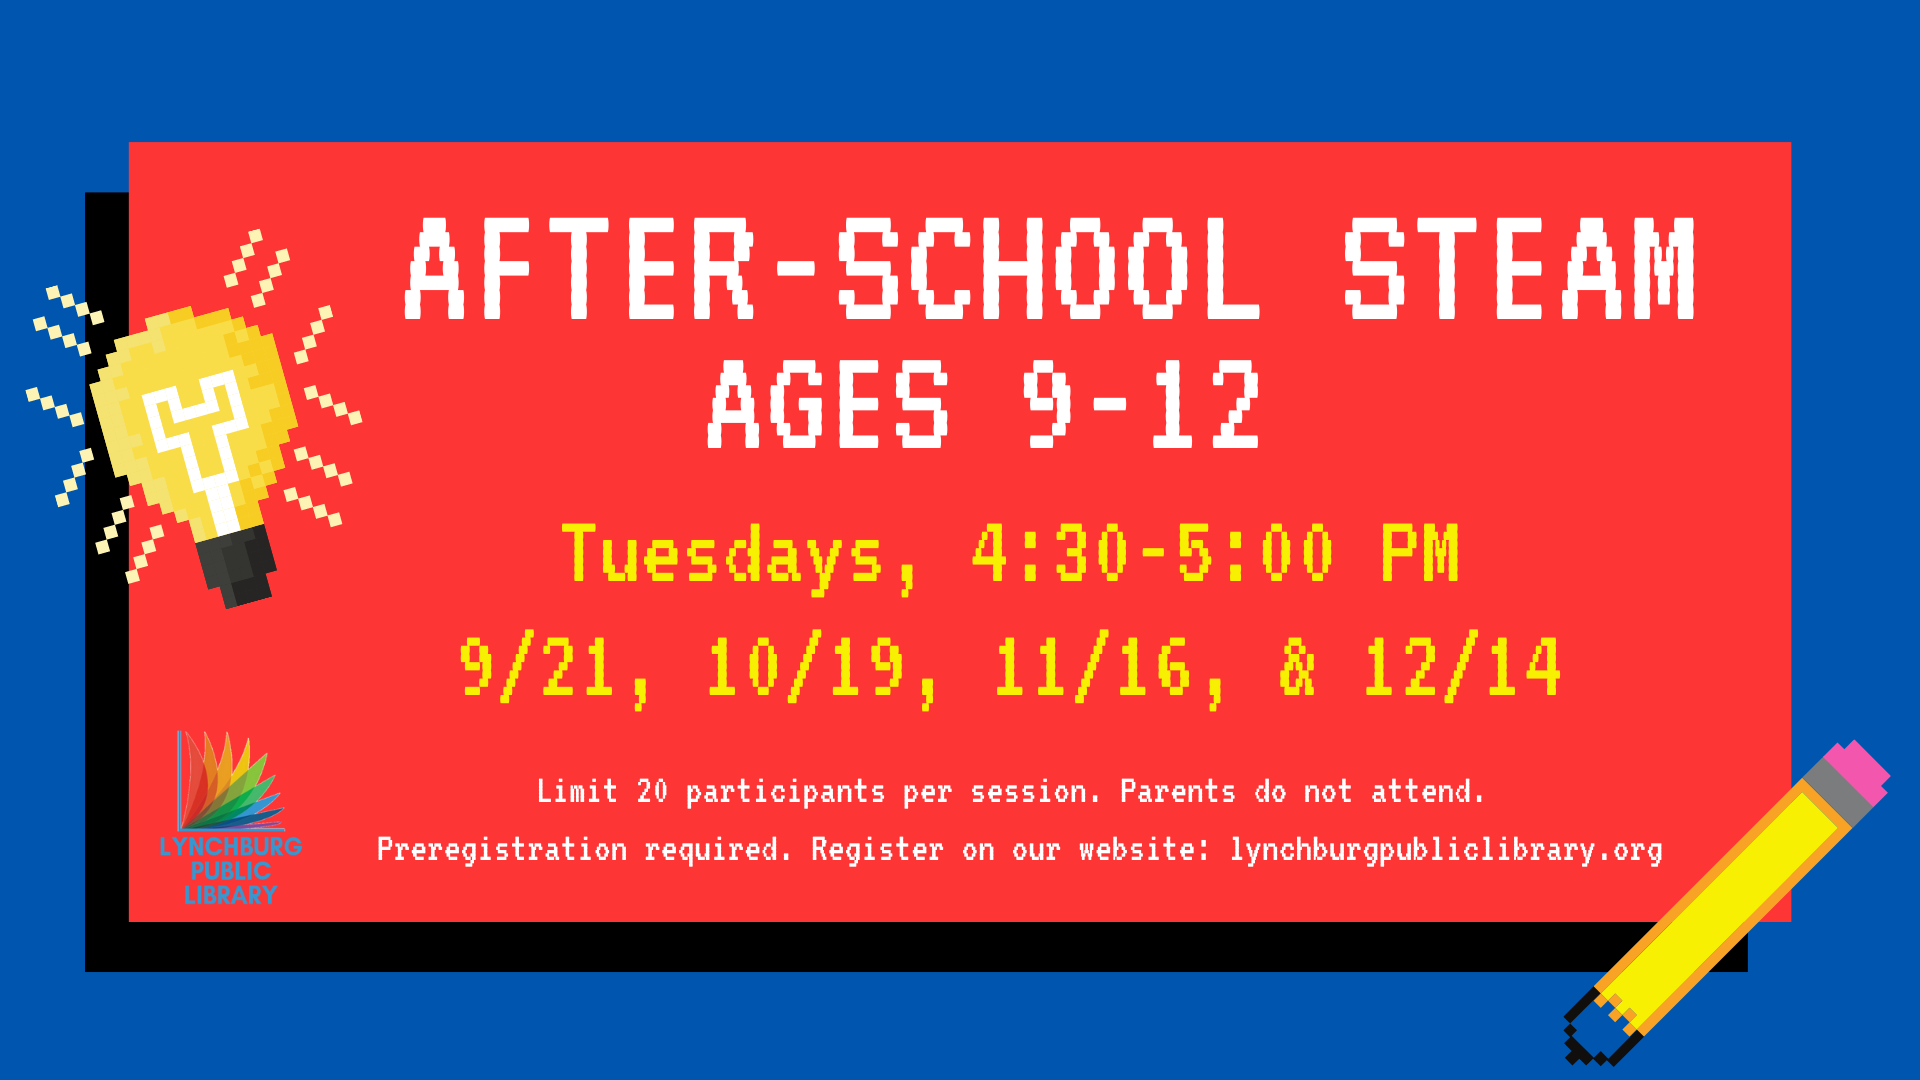 Red, blue, and yellow image in 8-bit style advertising After-School STEAM for ages 9-12 for fall 2021 semester